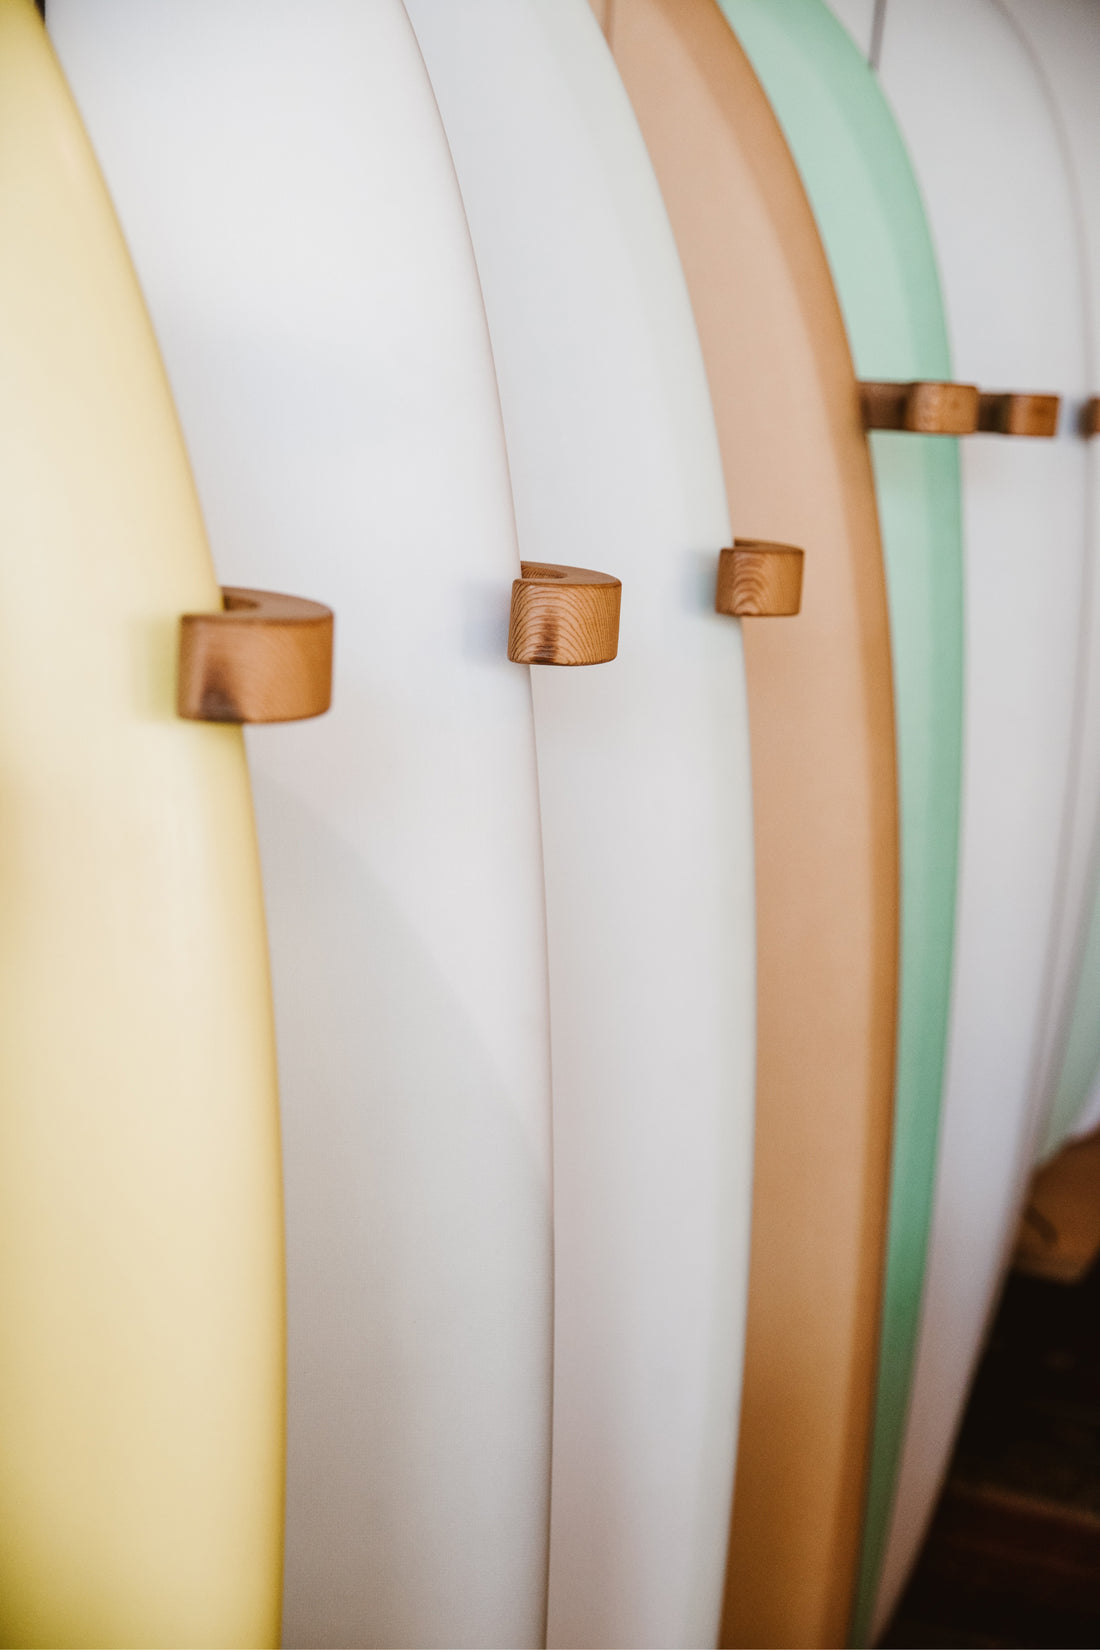 What to look for when buying a surfboard?